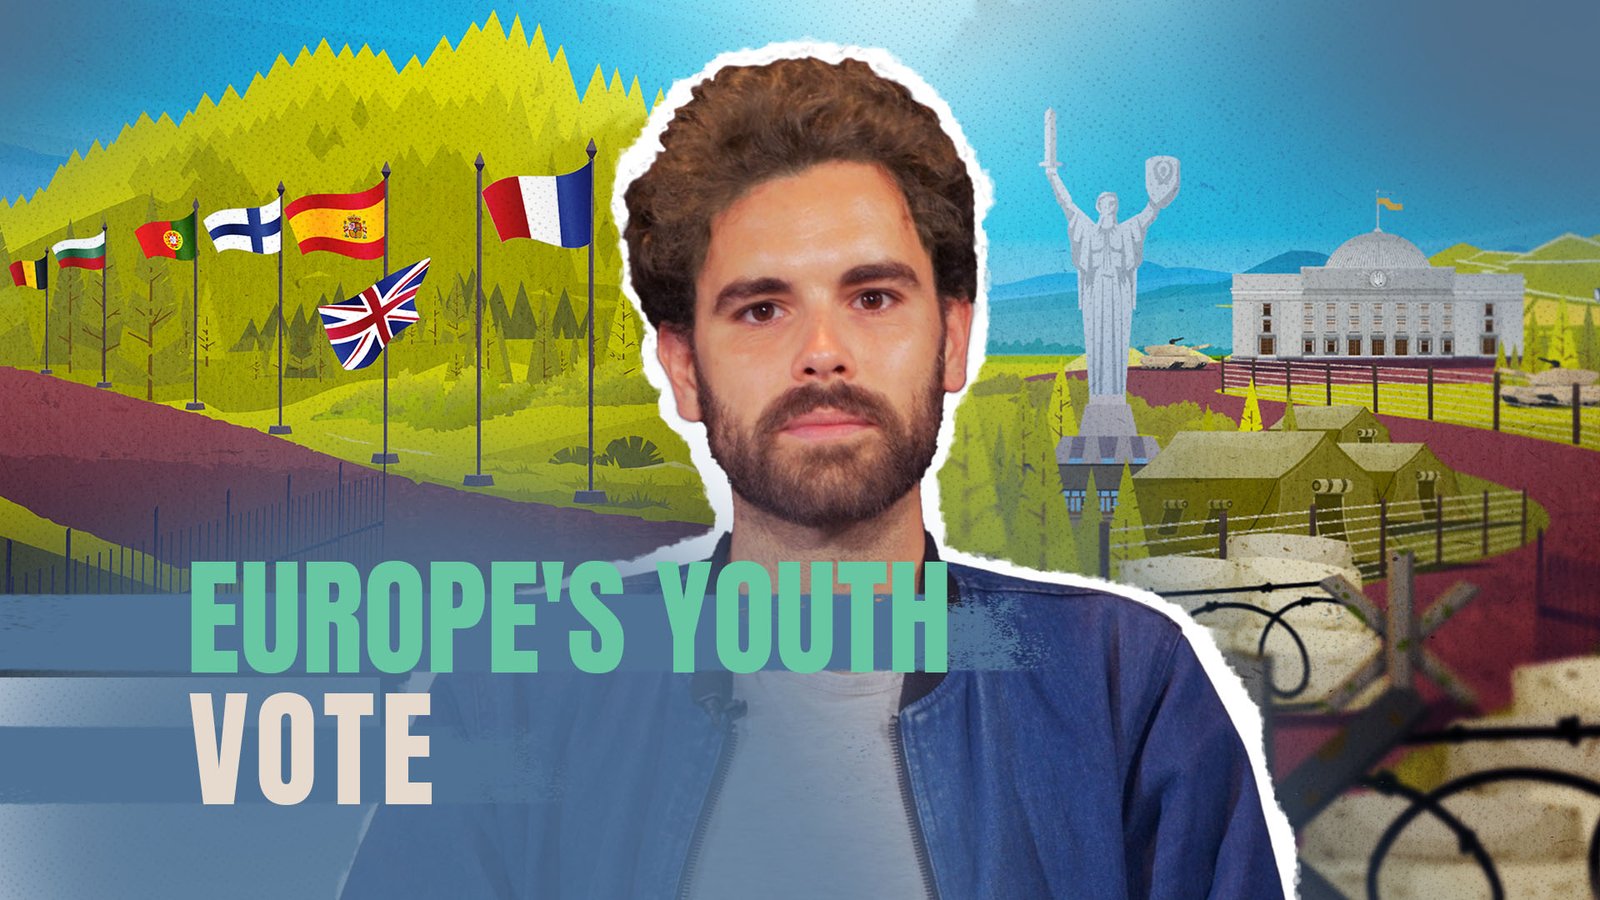 Europe’s Youth Vote